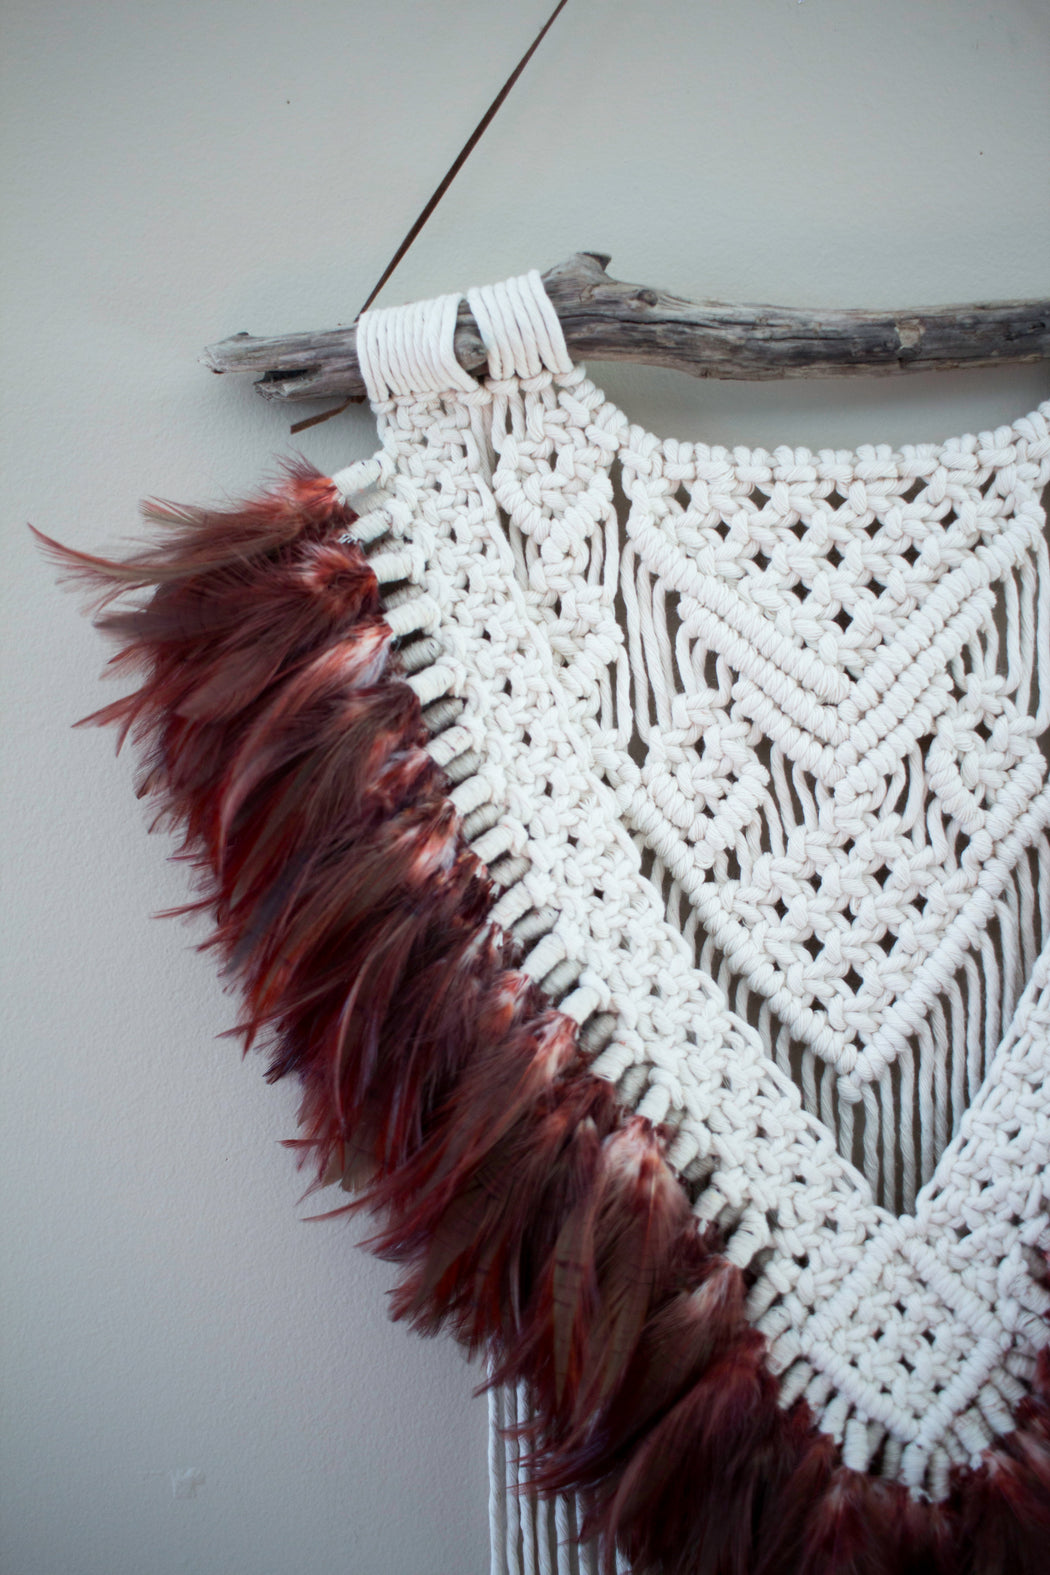 Medium Macrame Wall Hanging 100% Cotton Rope and Feathers